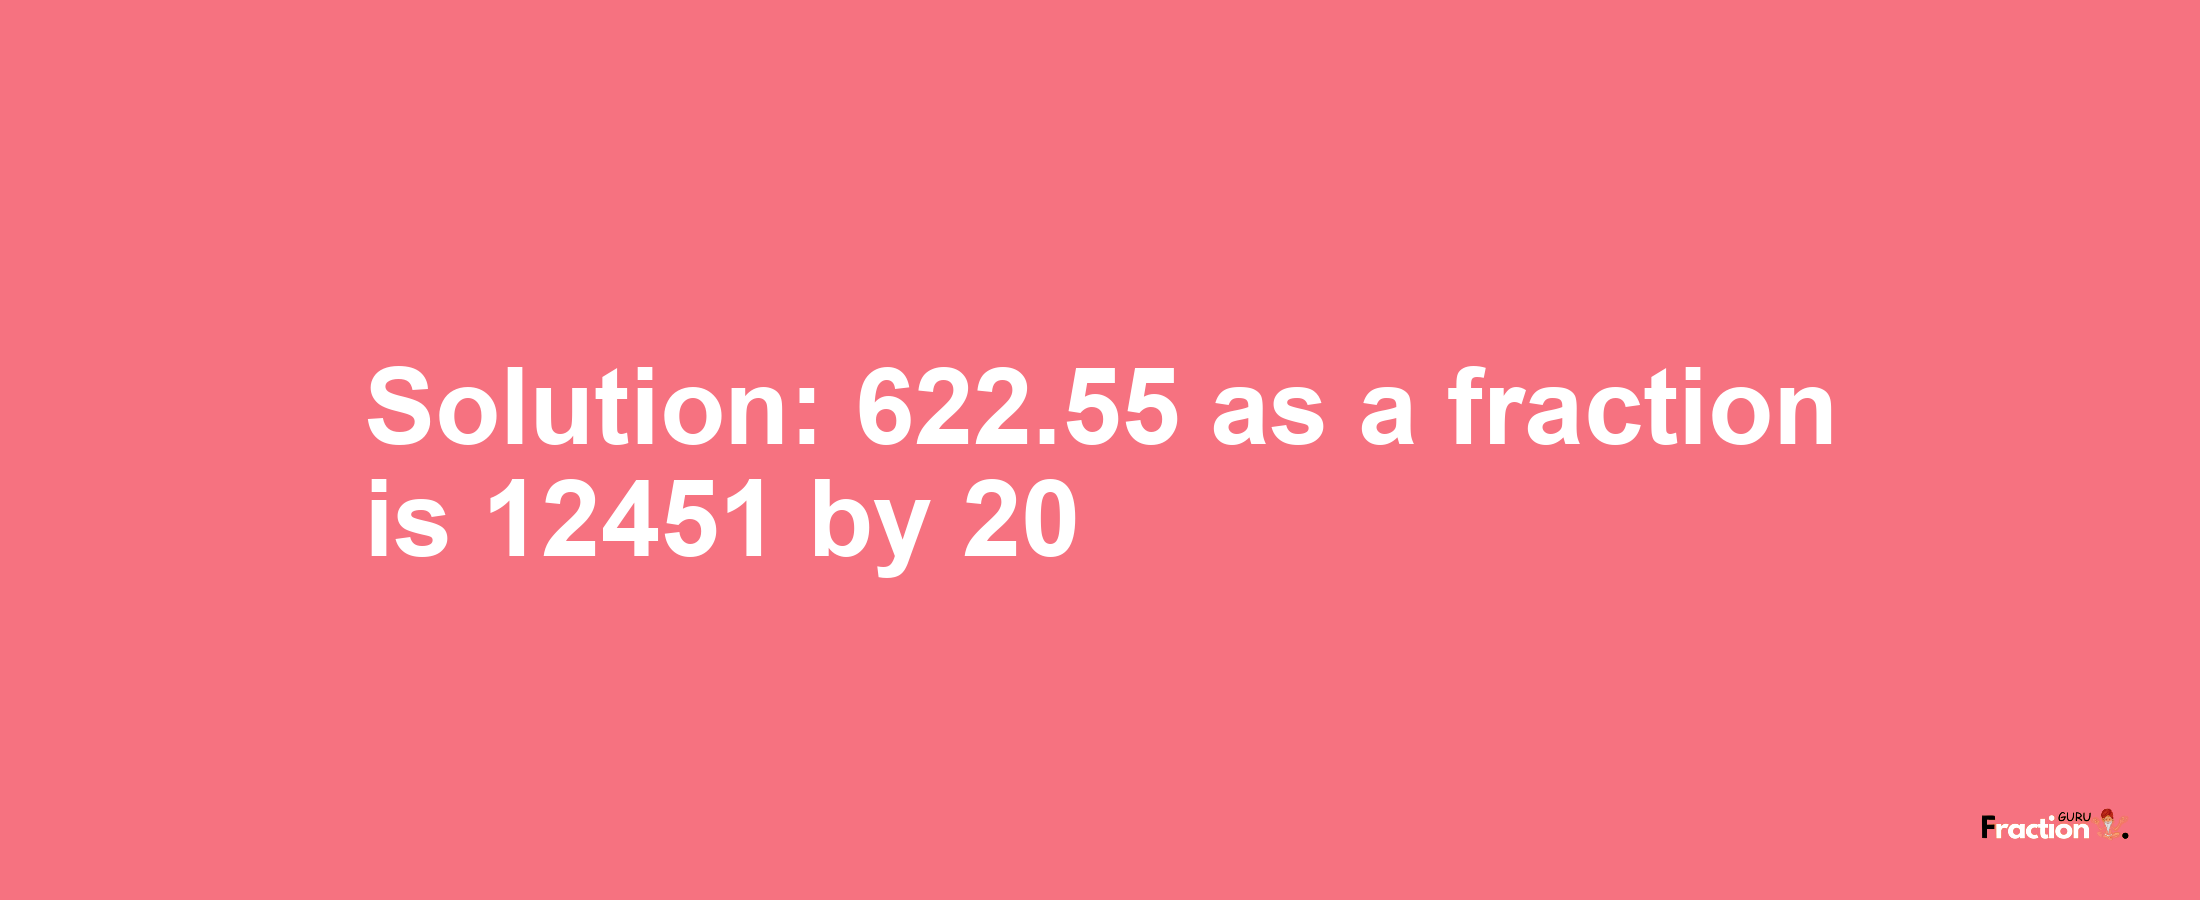 Solution:622.55 as a fraction is 12451/20